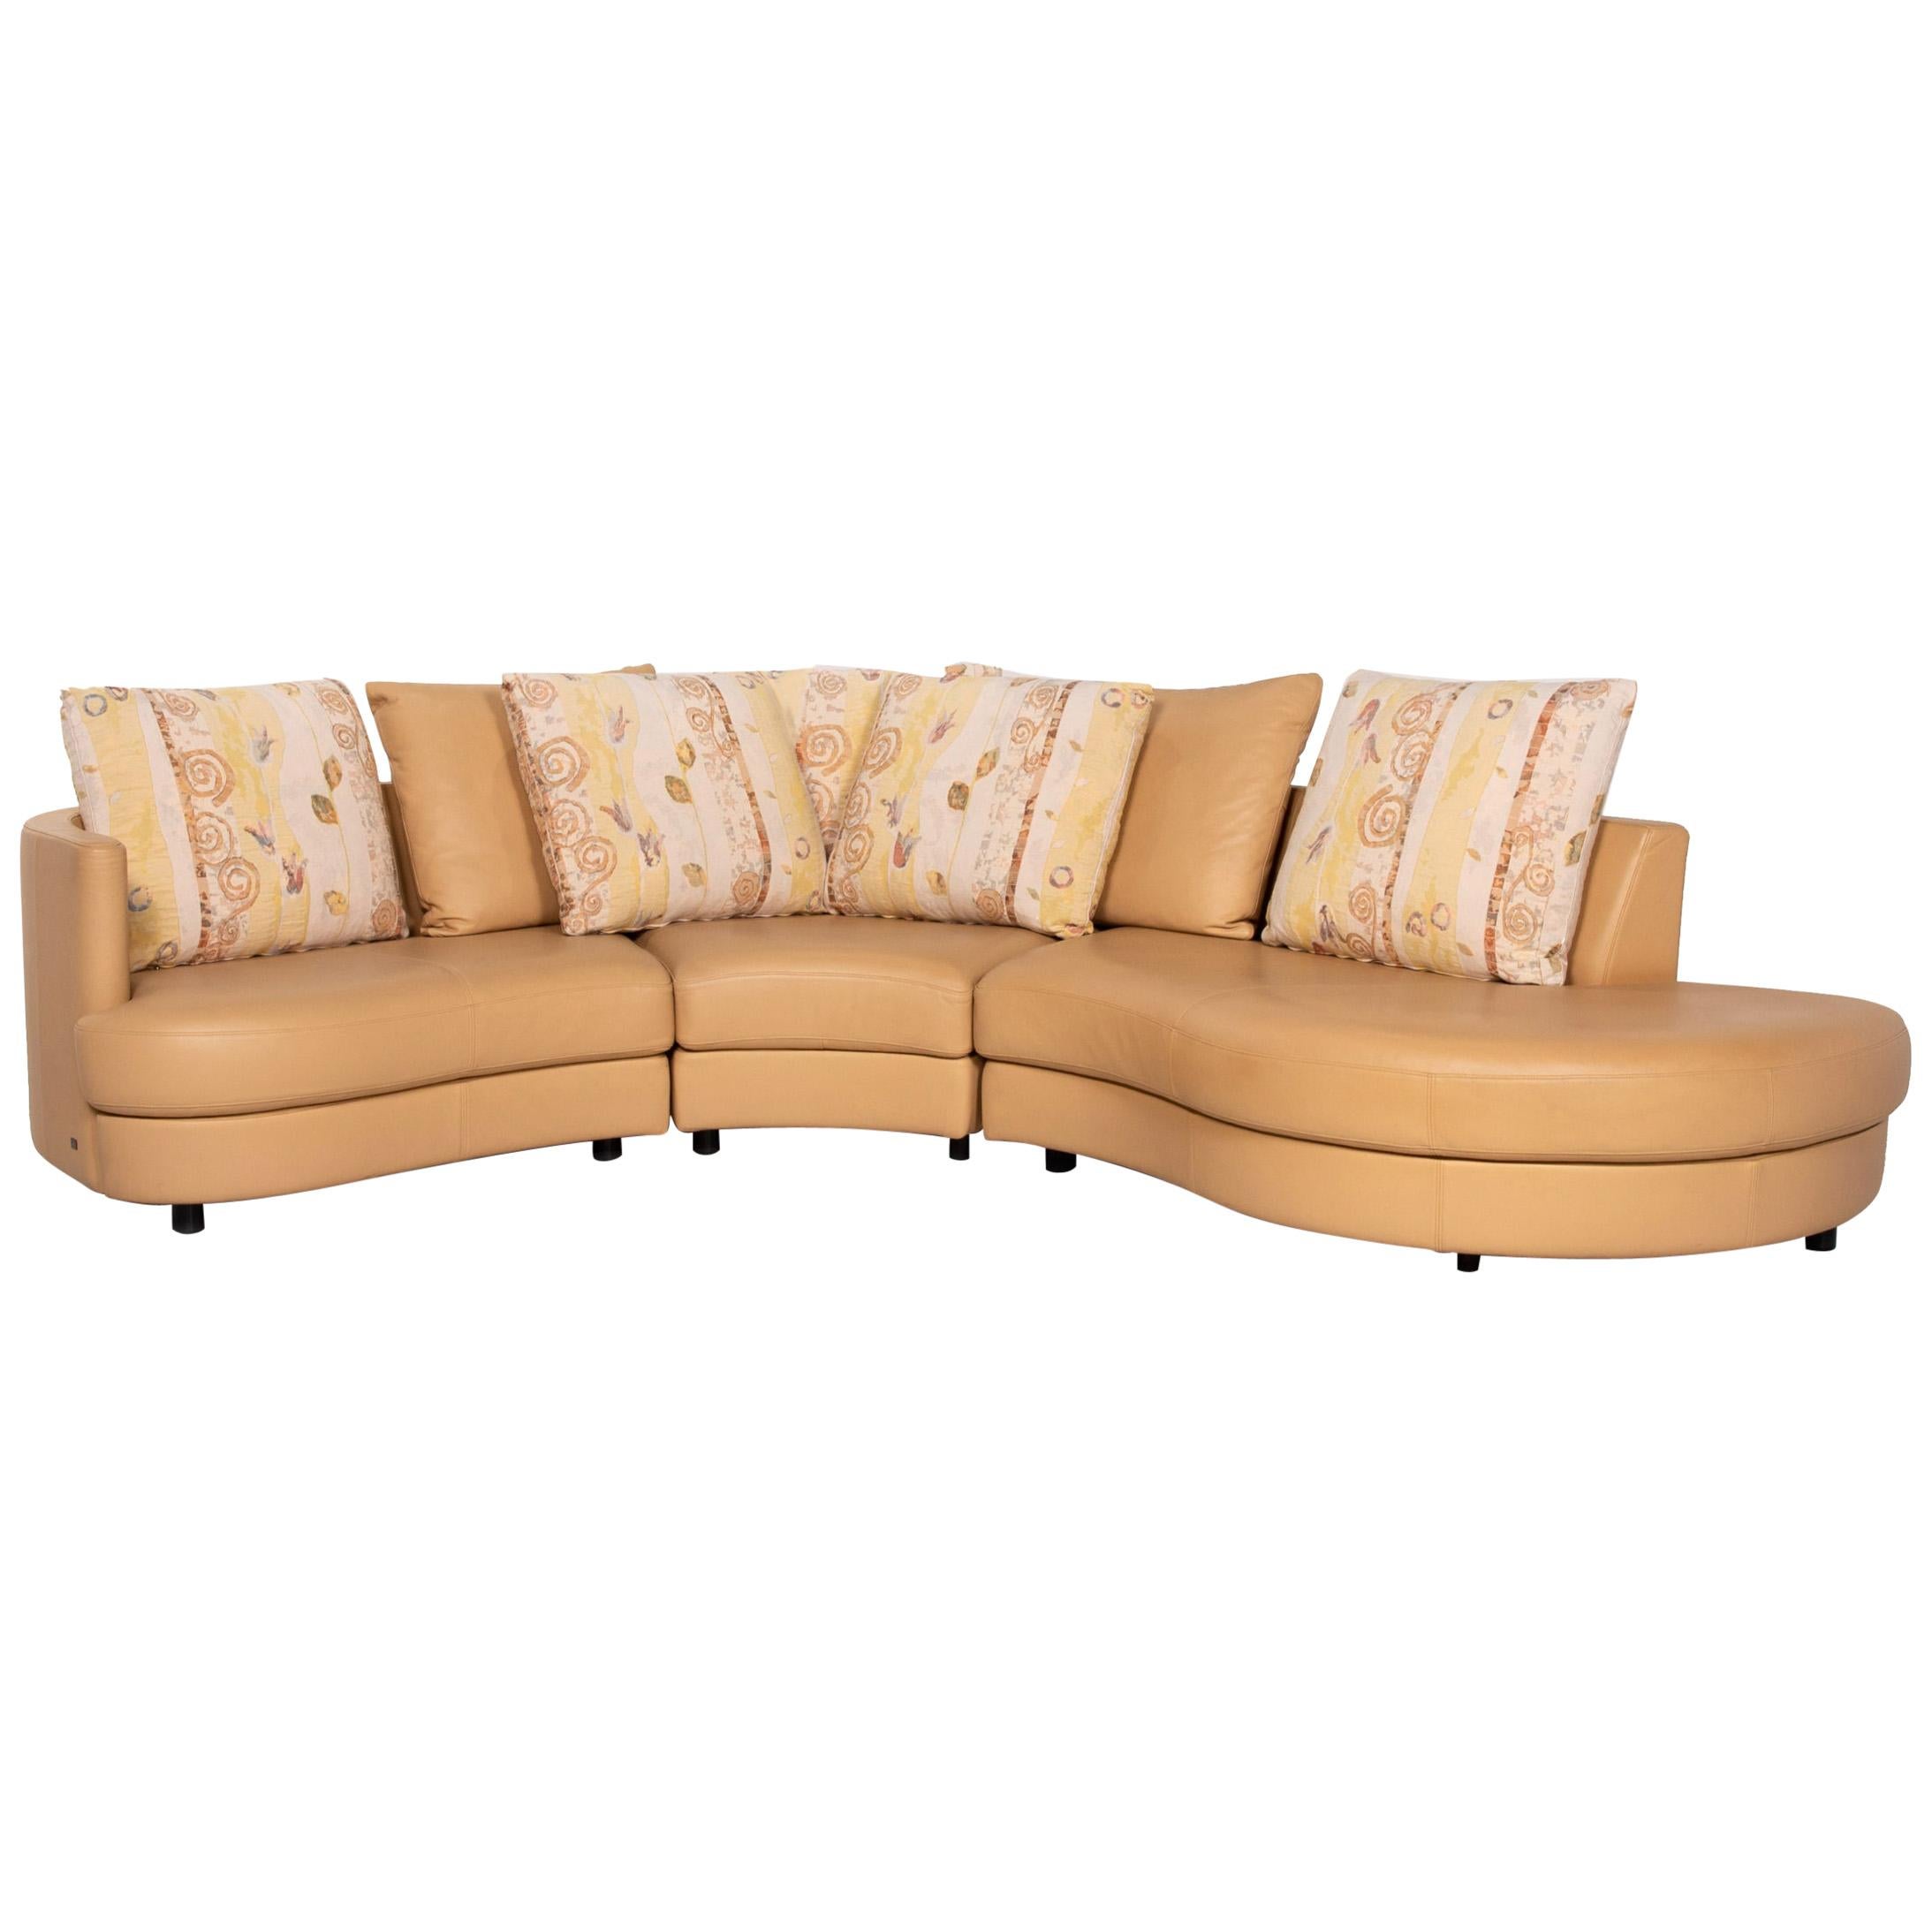 Rolf Benz Leather Corner Sofa Beige Patterned Sofa Couch